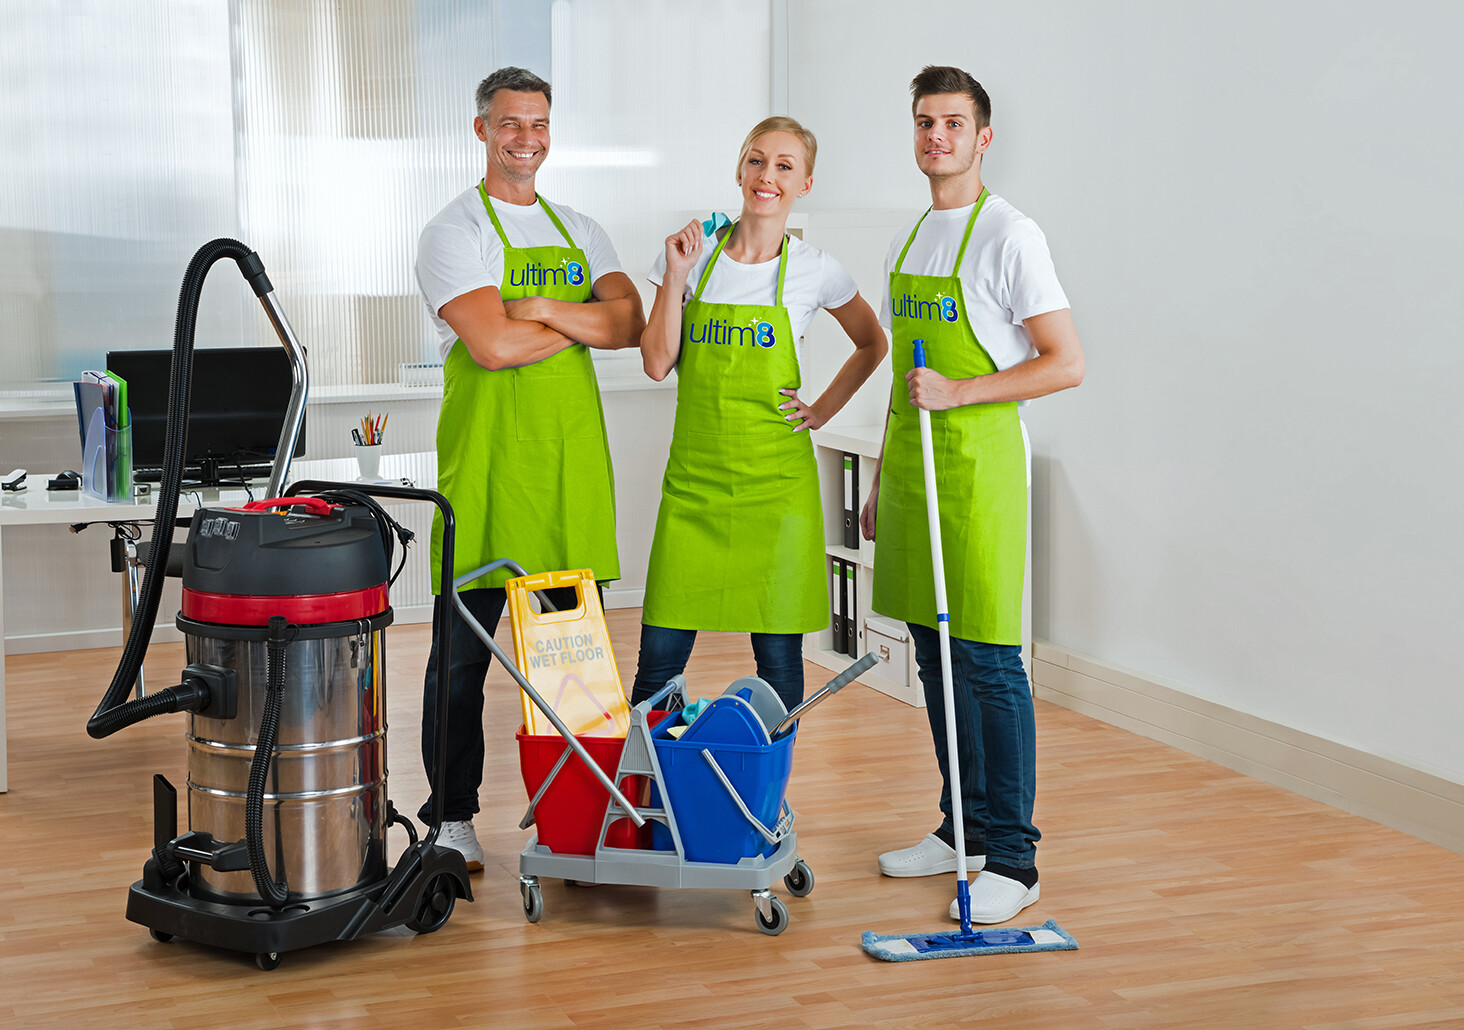 Tampa house cleaners